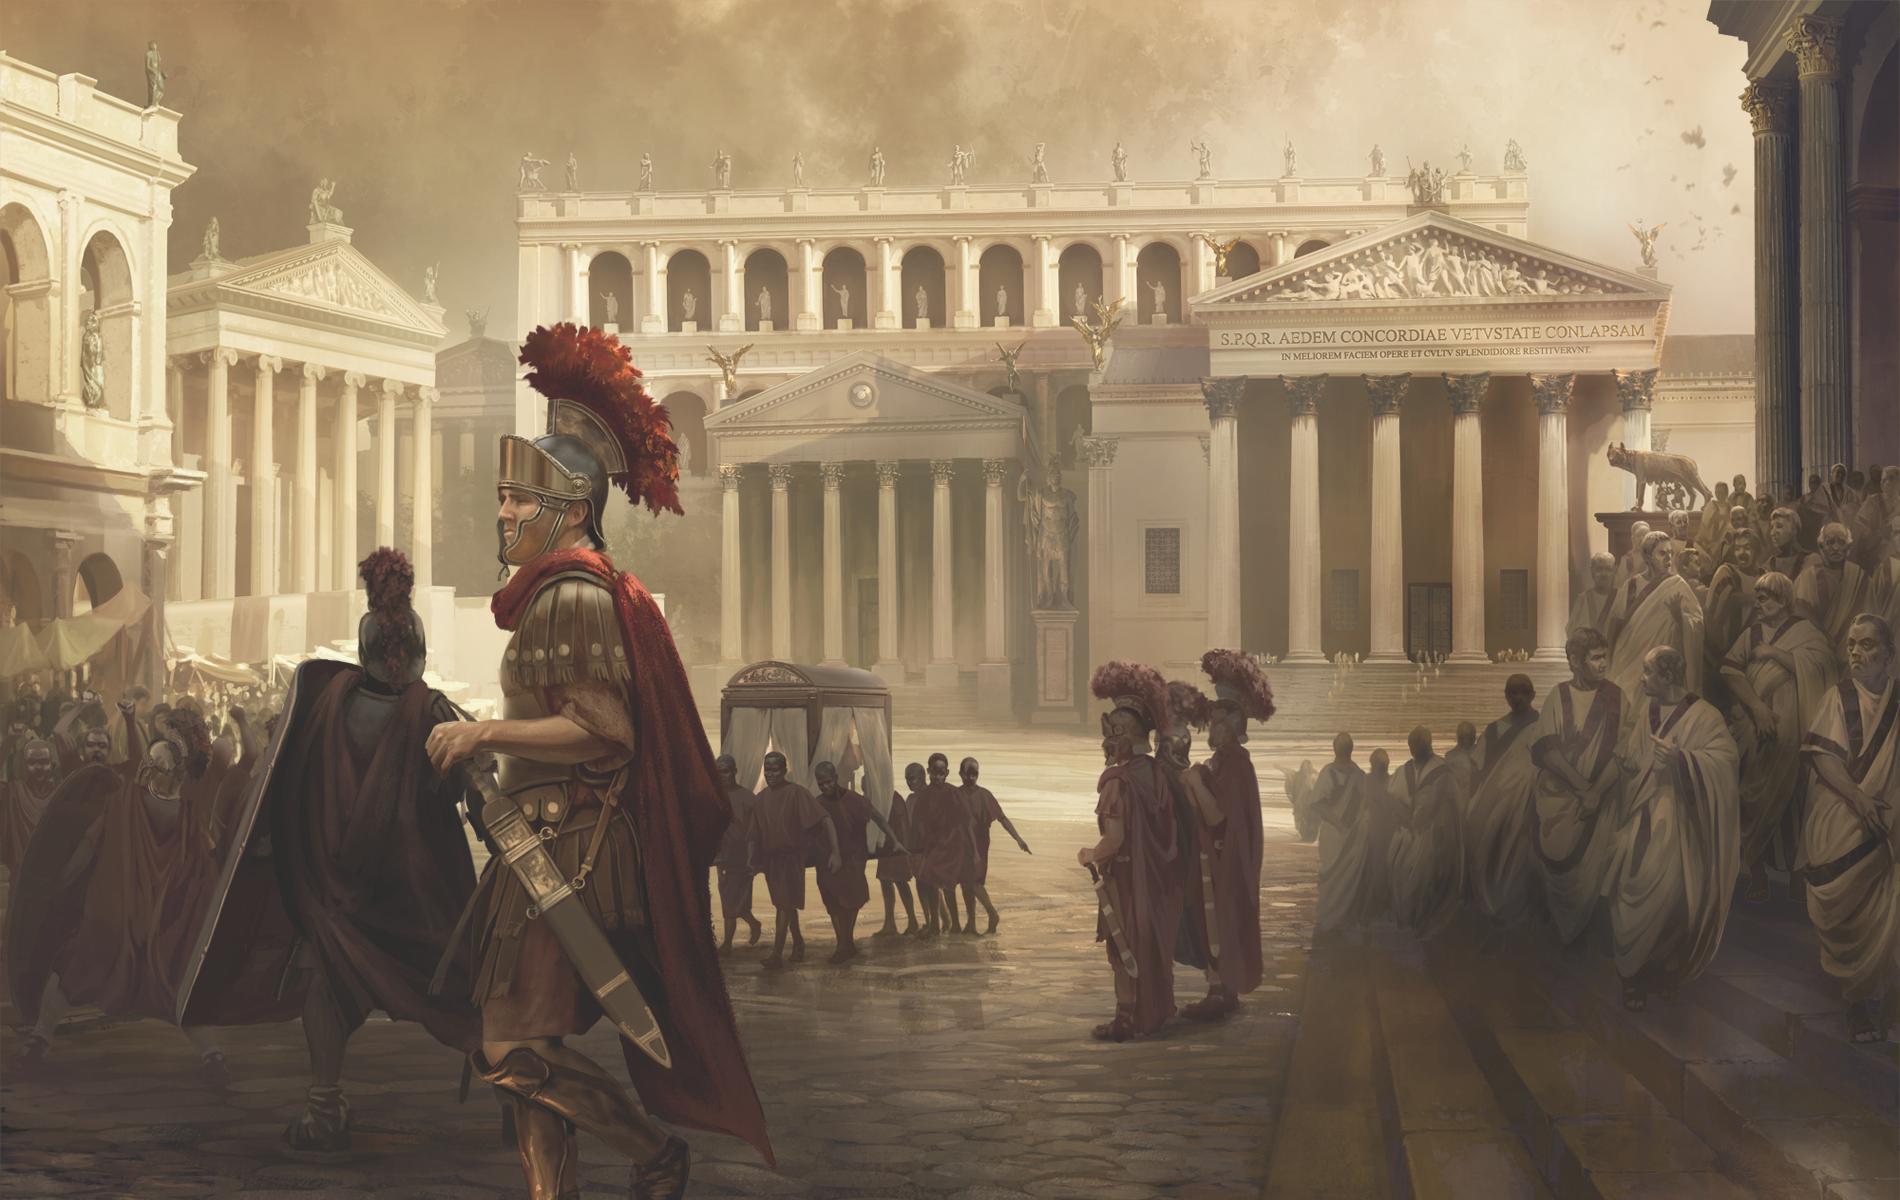 Roman Empire Free download the new version for mac